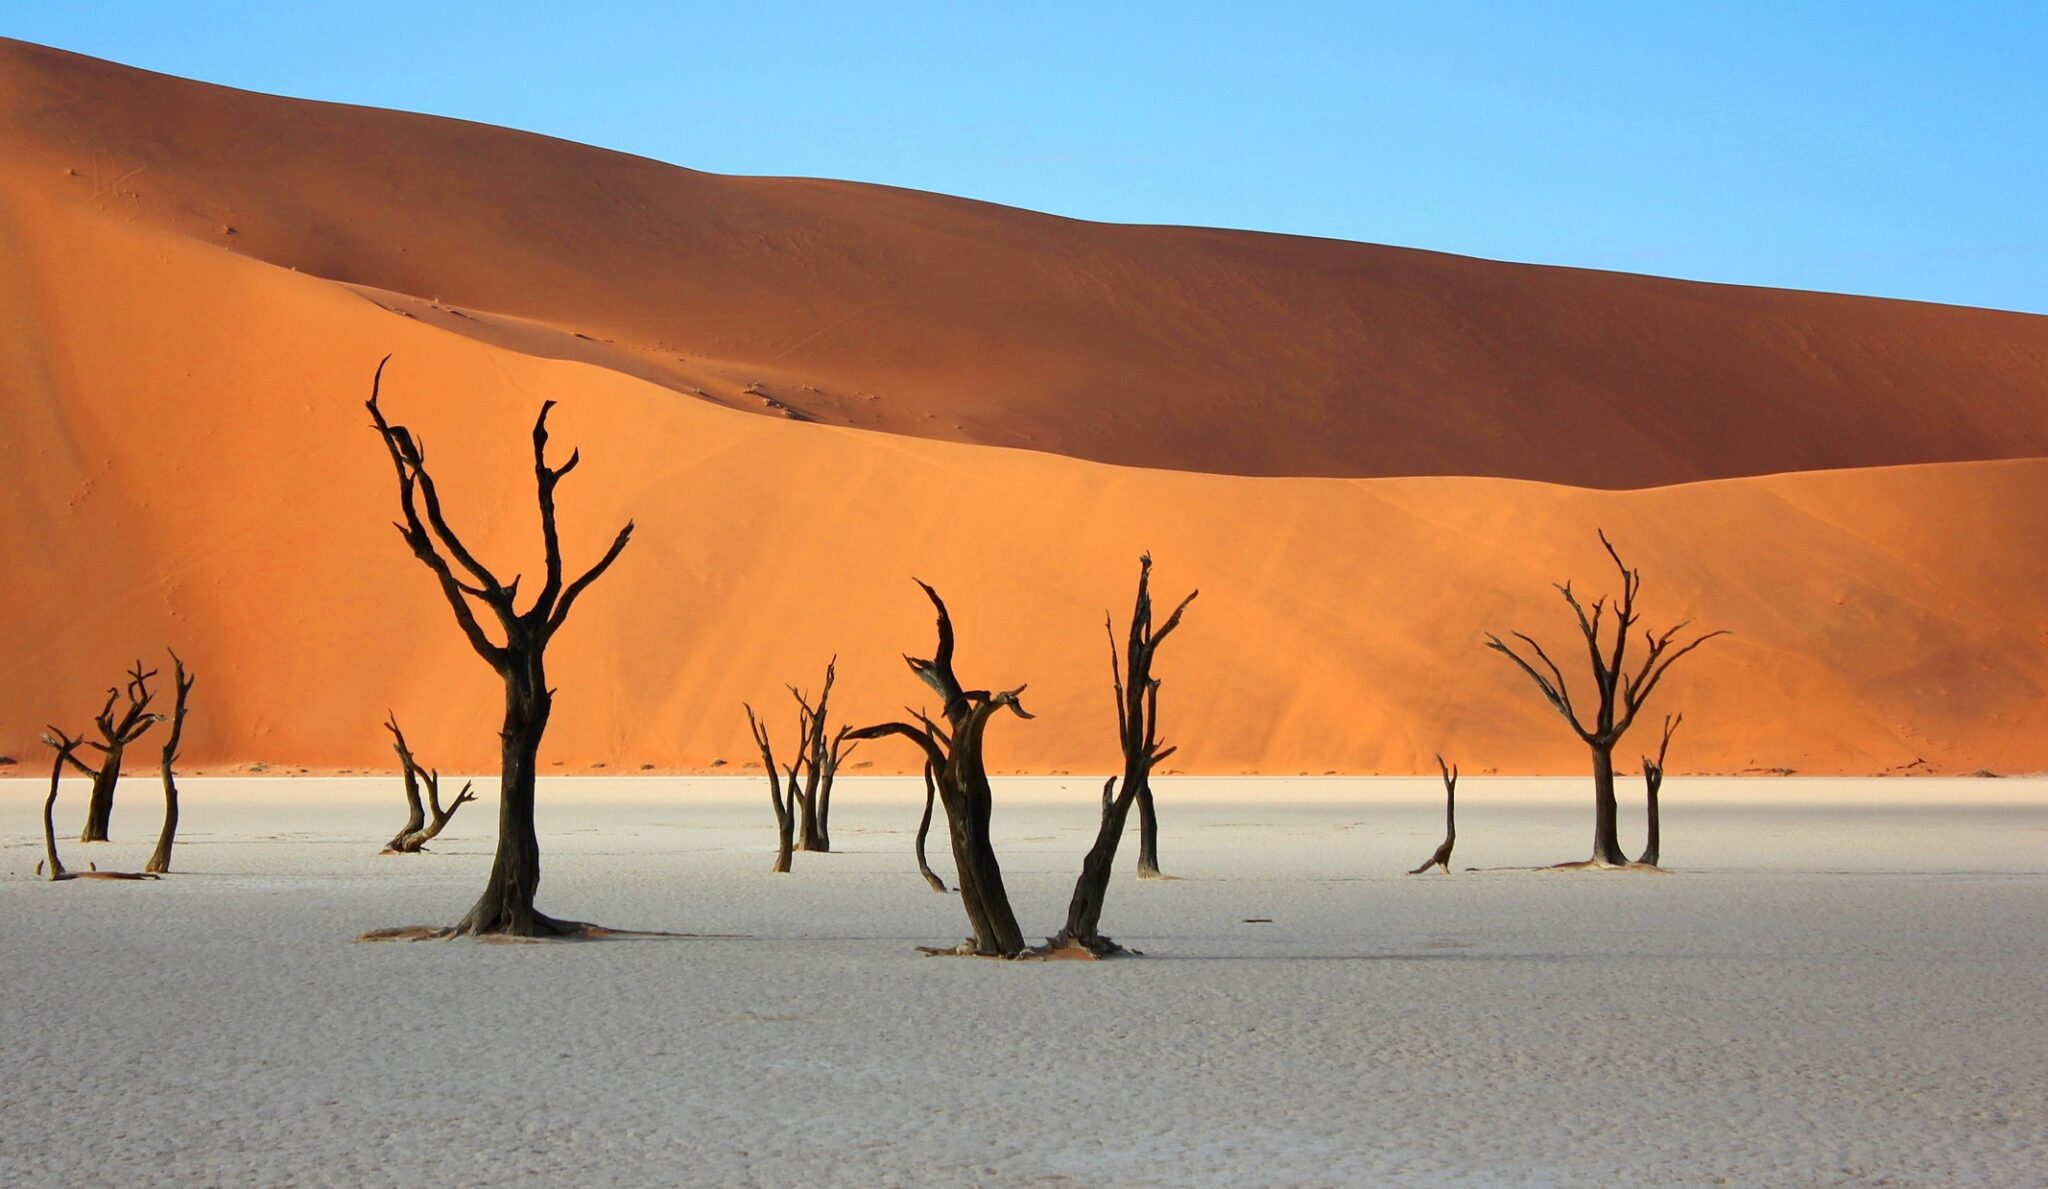 Trees in white sand in front of a red sun dune under a blue sky in Namibia